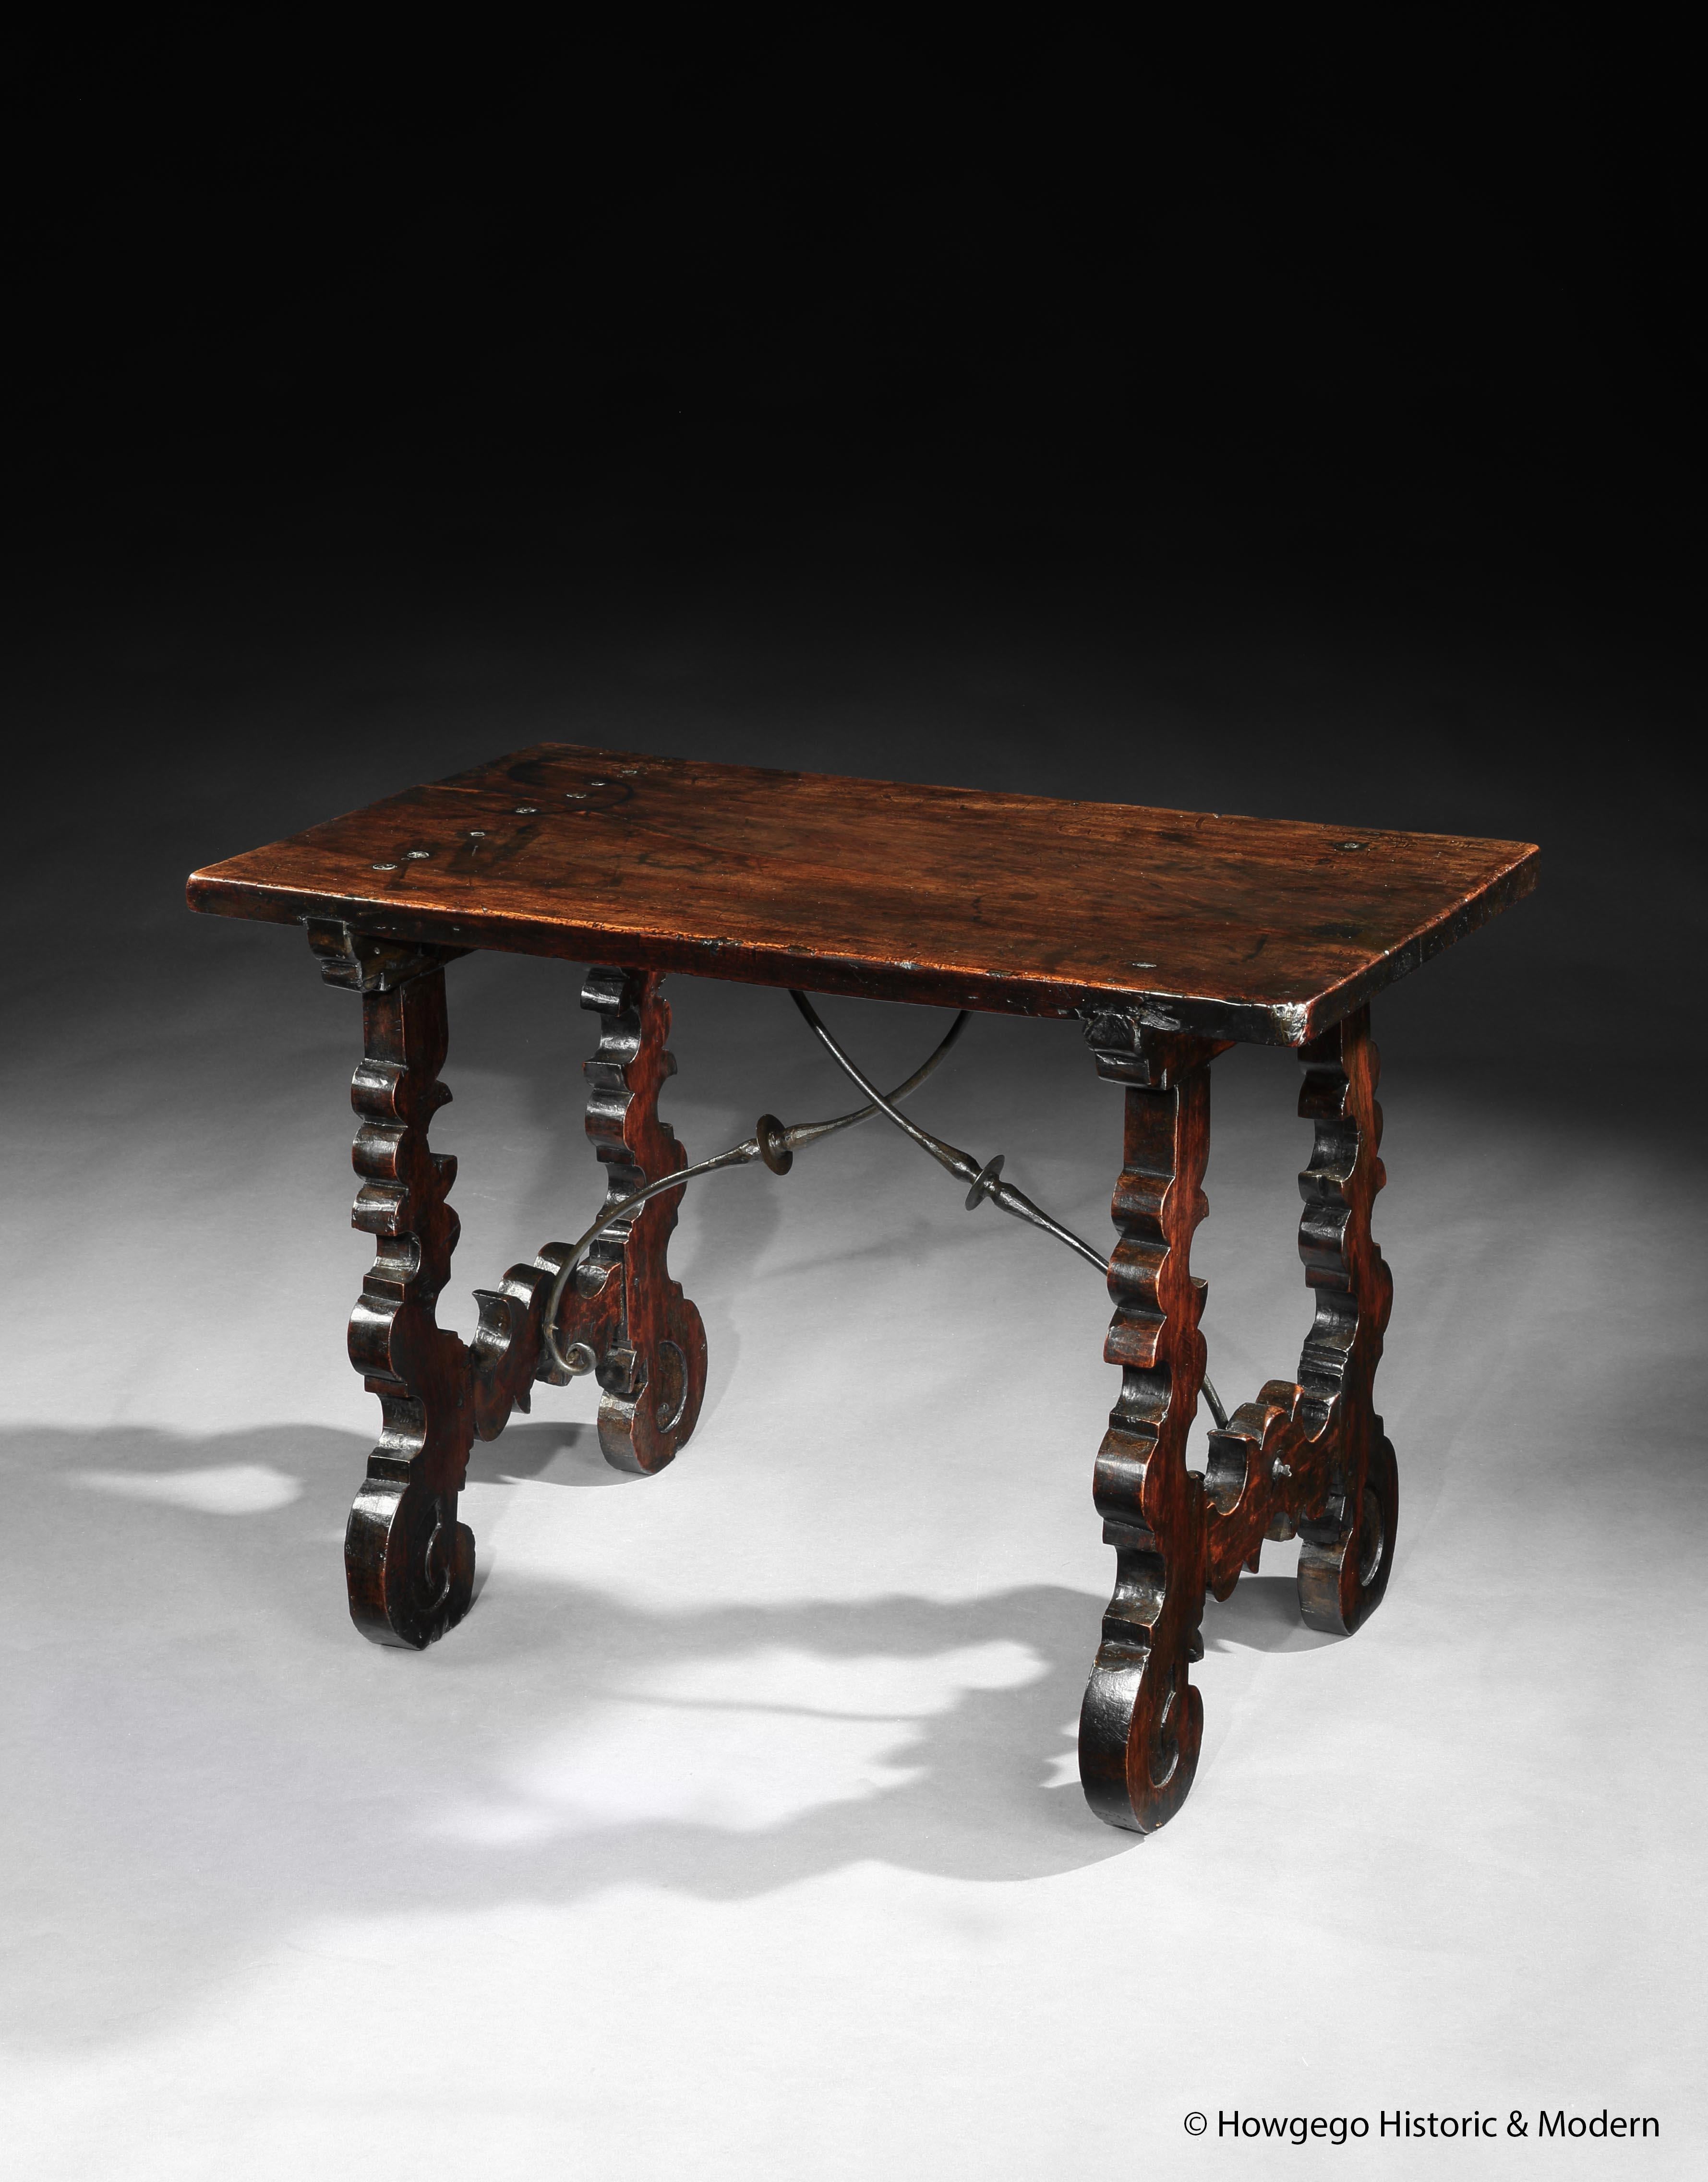 - Unusual, small, narrow size
- Characterful one piece walnut top with stunning lustrous, rich patina and original iron studs at either end of the top forming part of the aesthetic
- There is fracture along the top, it is not a break as it does